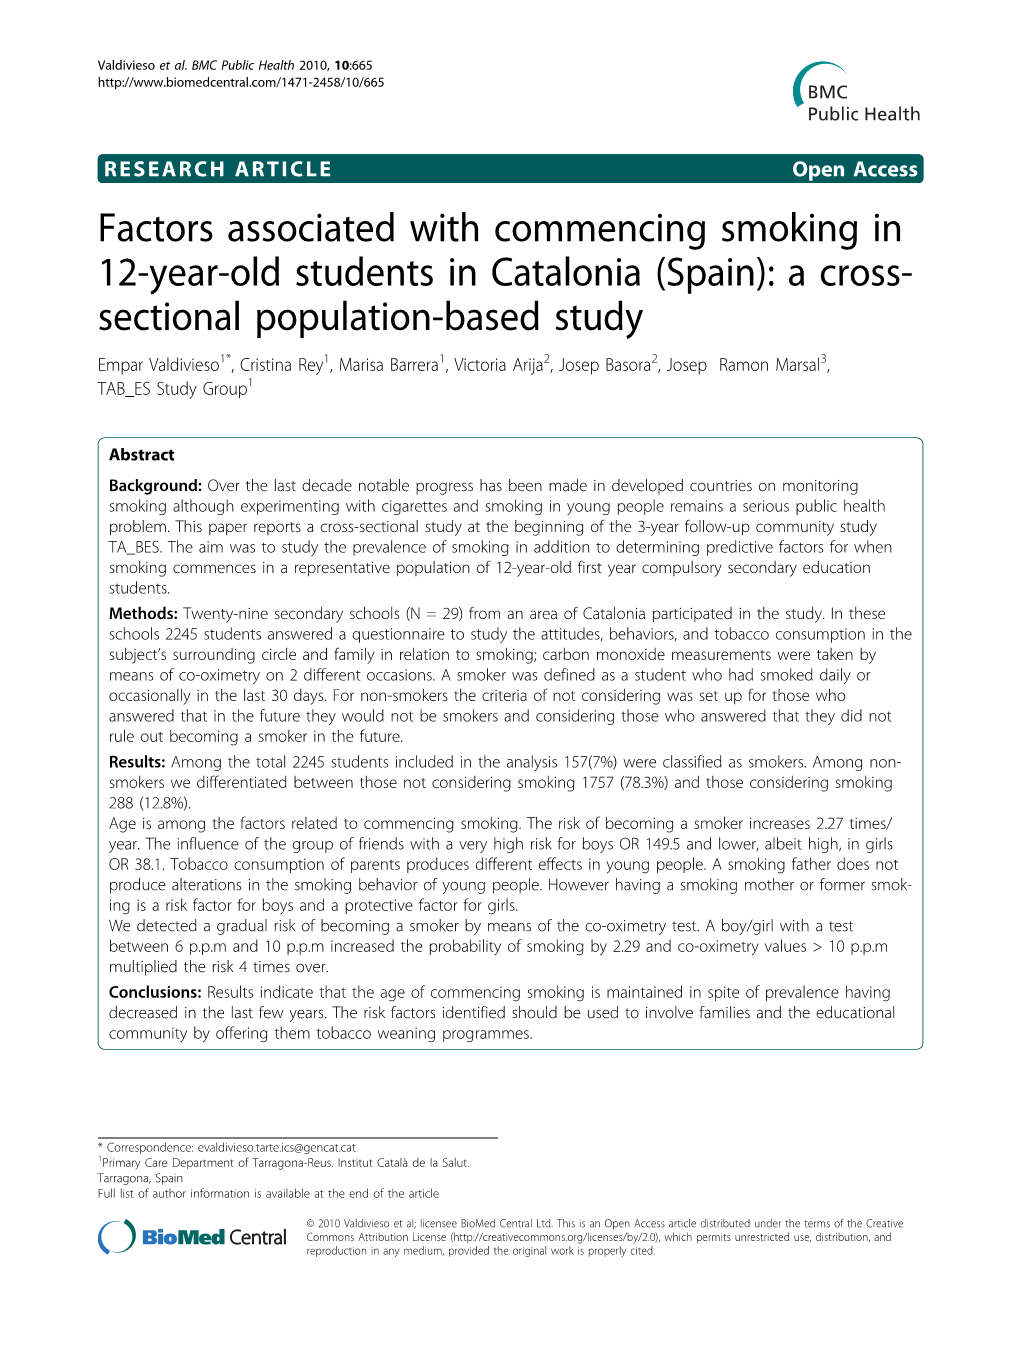 Factors Associated with Commencing Smoking in 12